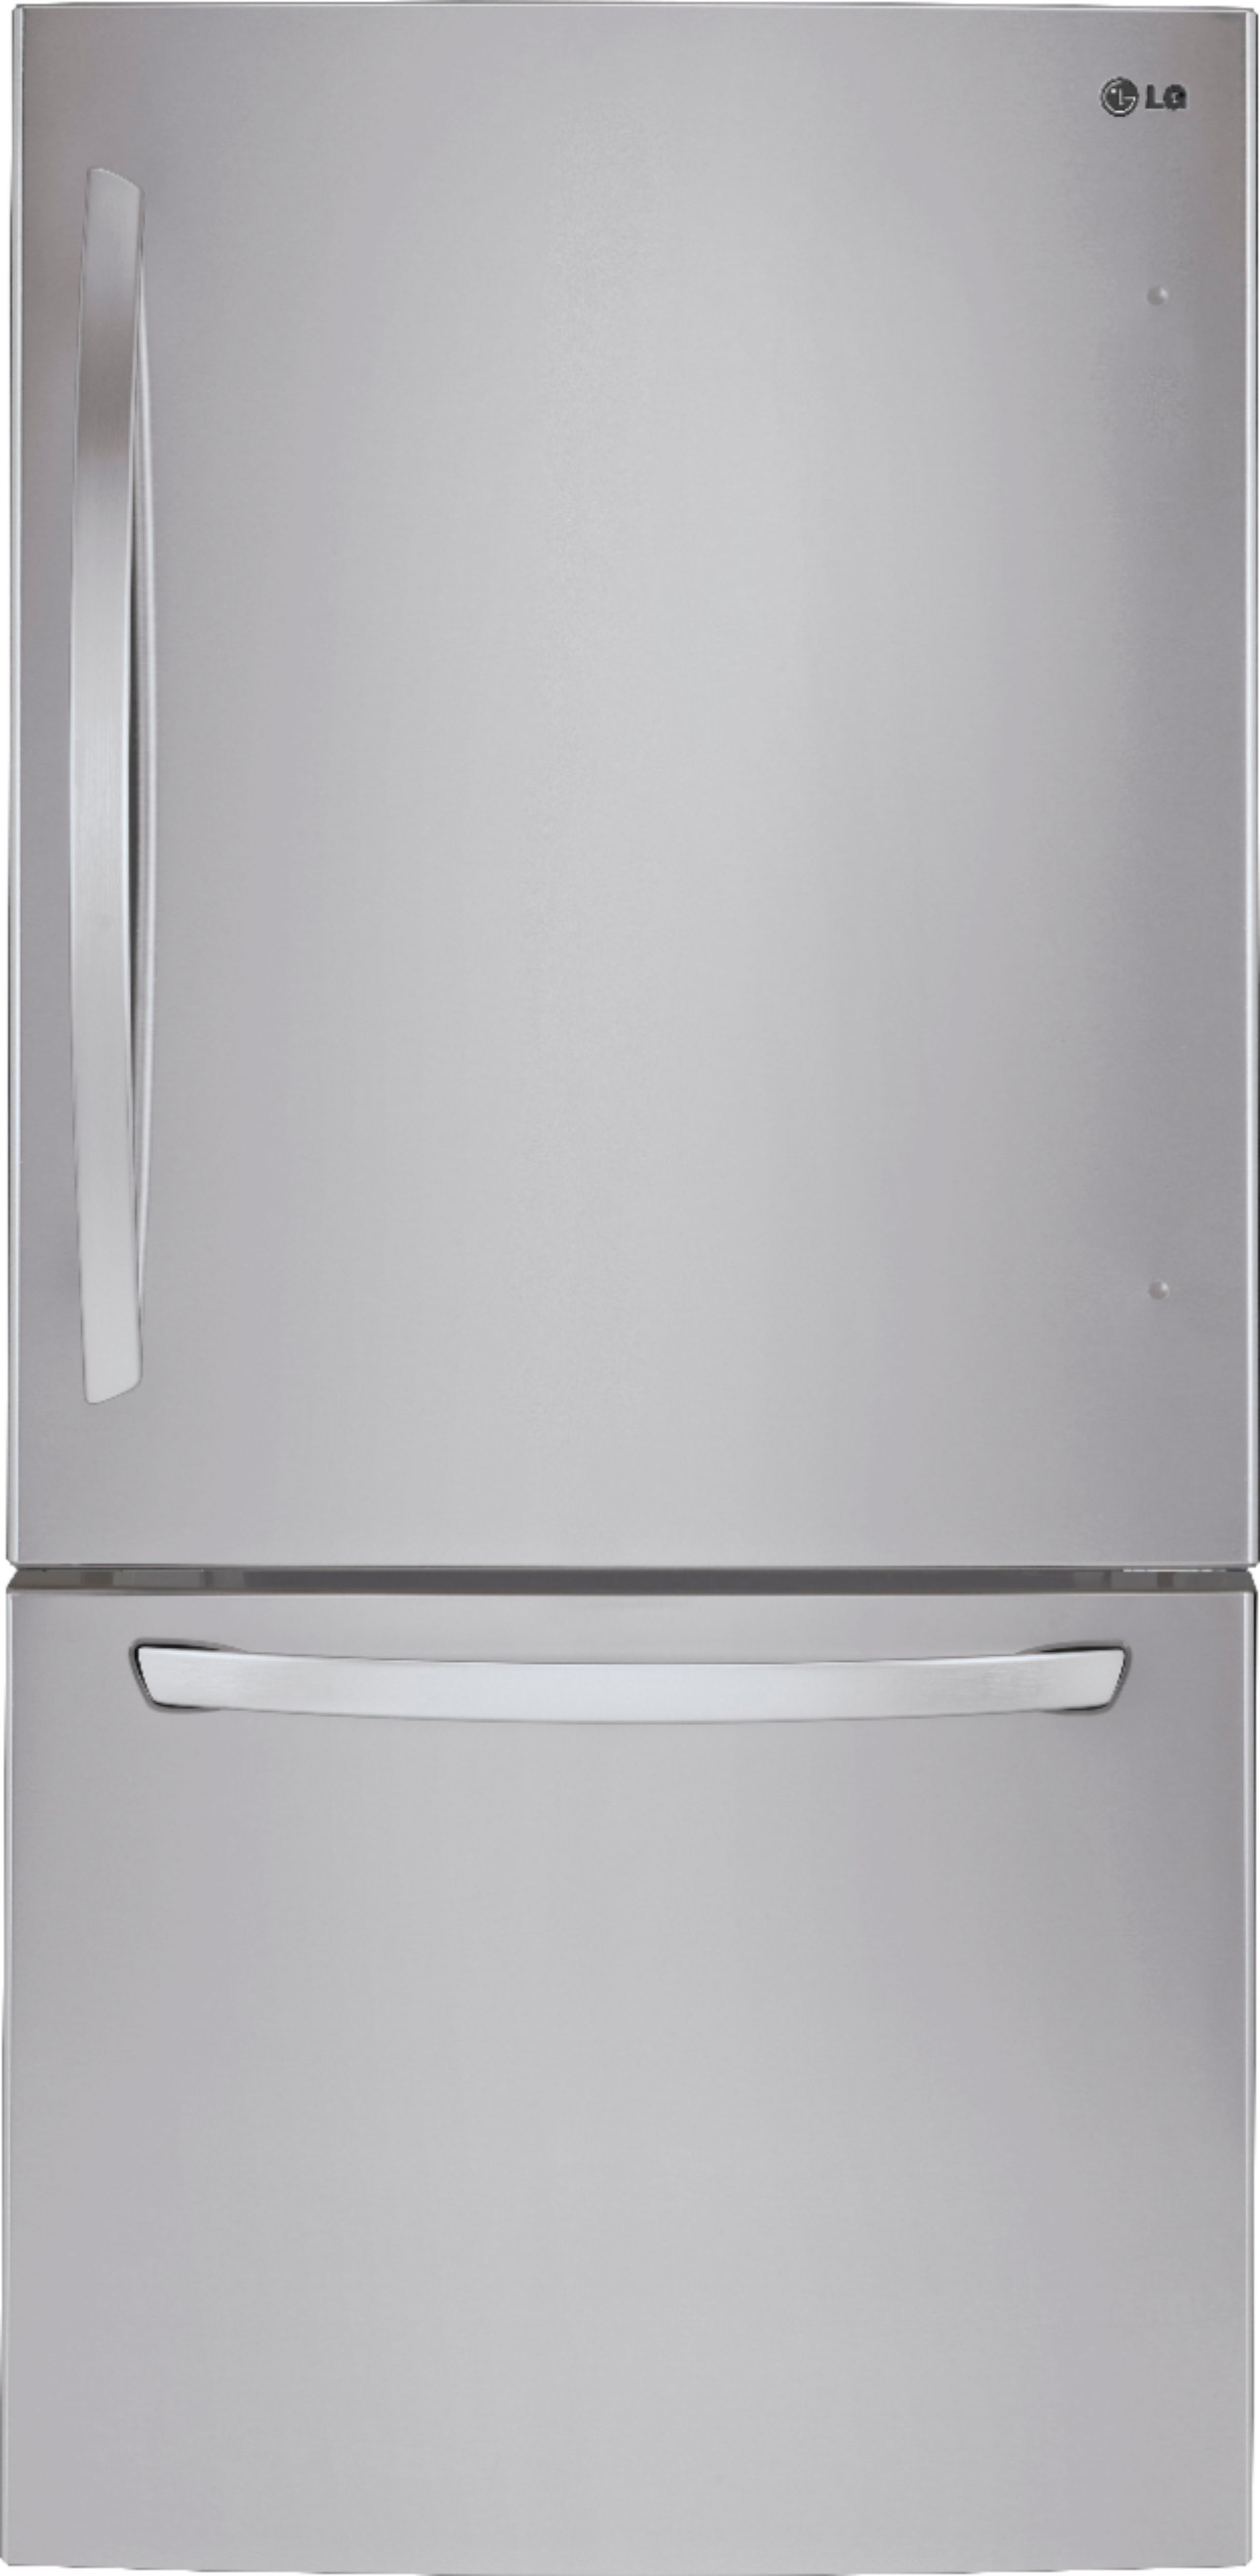 Lg 33 Wide Large Capacity Bottom Freezer Refrigerator Stainless Steel At Pacific Sales